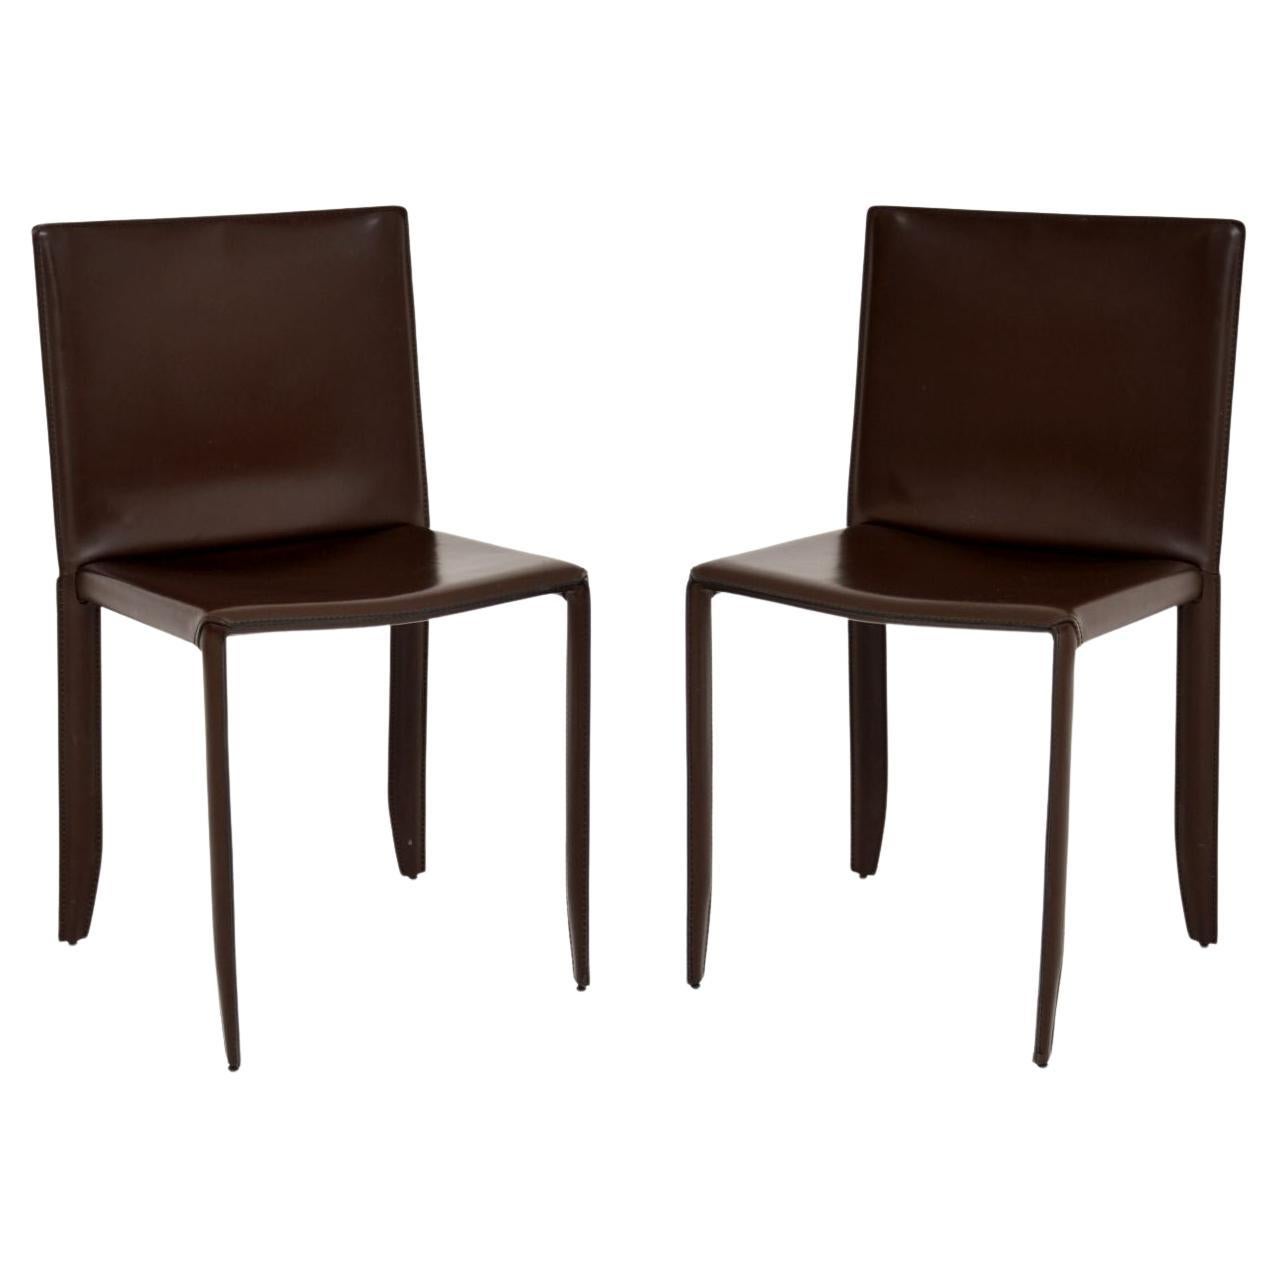 Pair of Modernist Italian Leather Side Chairs by Cattelan Italia